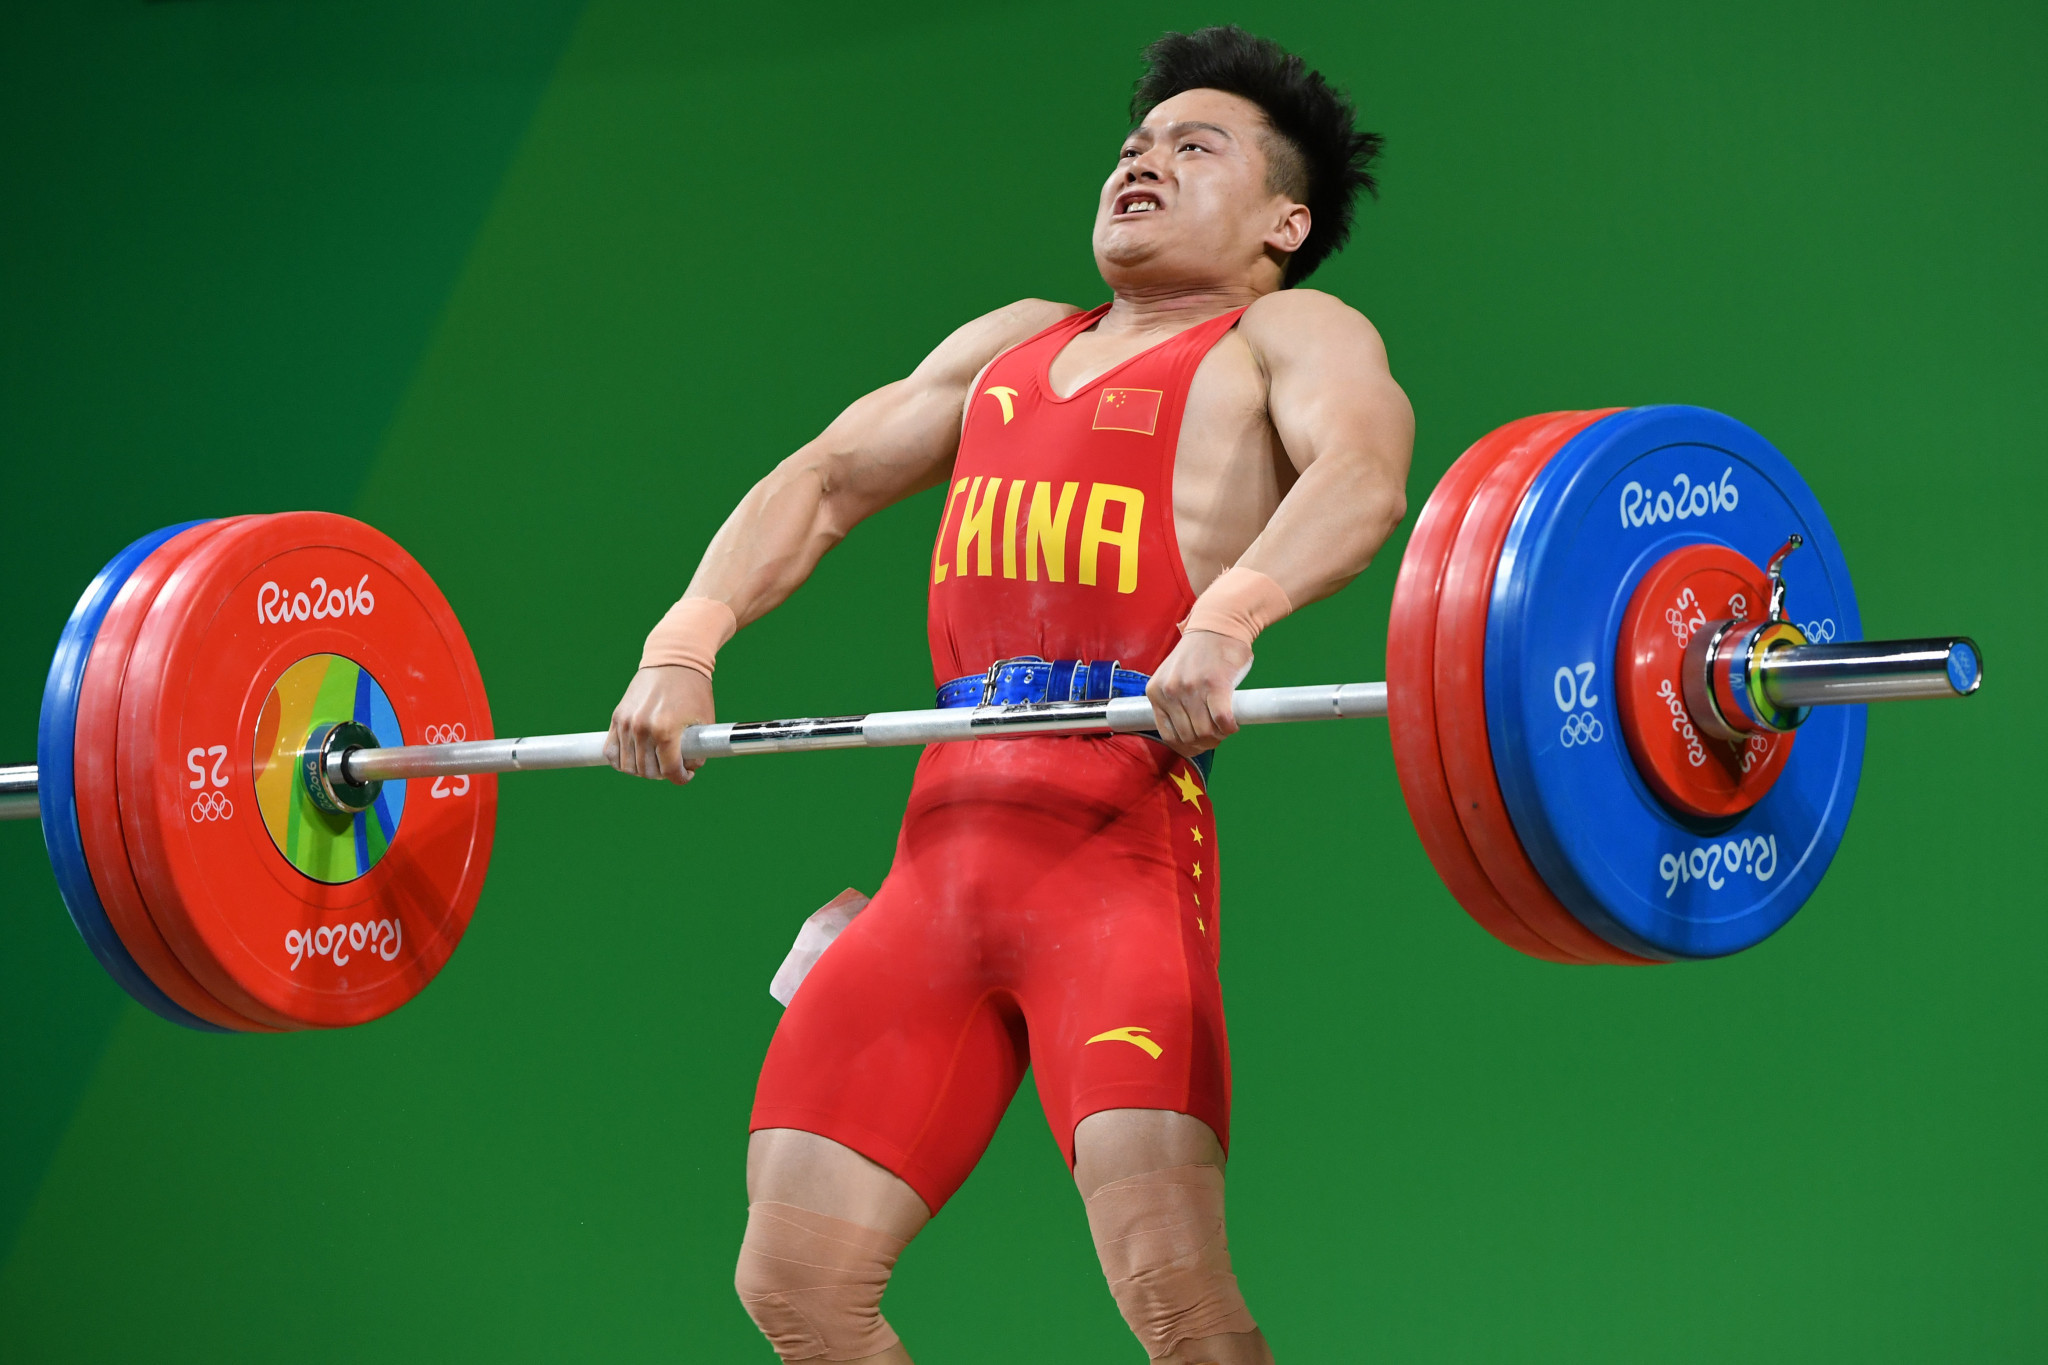 China's Long Qingquan competes during the men's 56kg weightlifting event at the Rio 2016 Olympic Games in Rio de Janeiro ©Getty Images